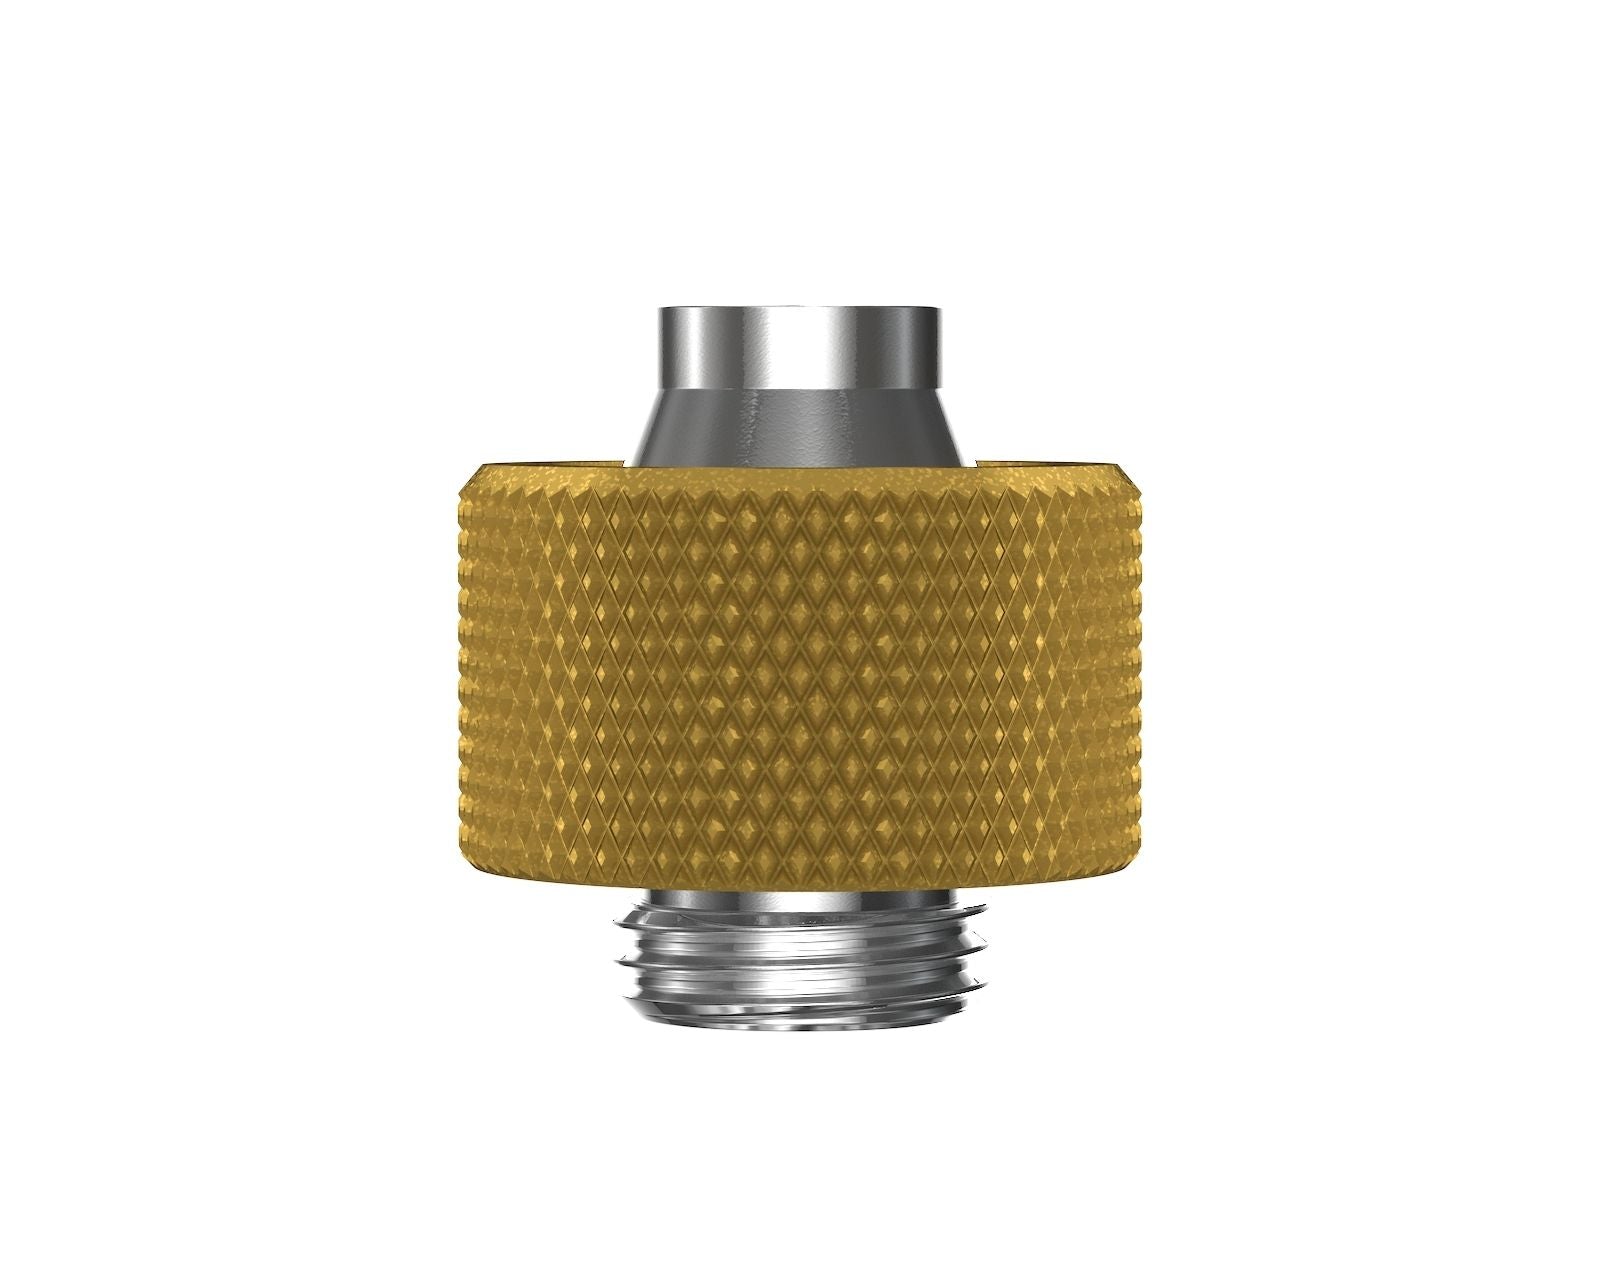 PrimoChill SecureFit SX - Premium Compression Fitting For 7/16in ID x 5/8in OD Flexible Tubing (F-SFSX758) - Available in 20+ Colors, Custom Watercooling Loop Ready - Gold